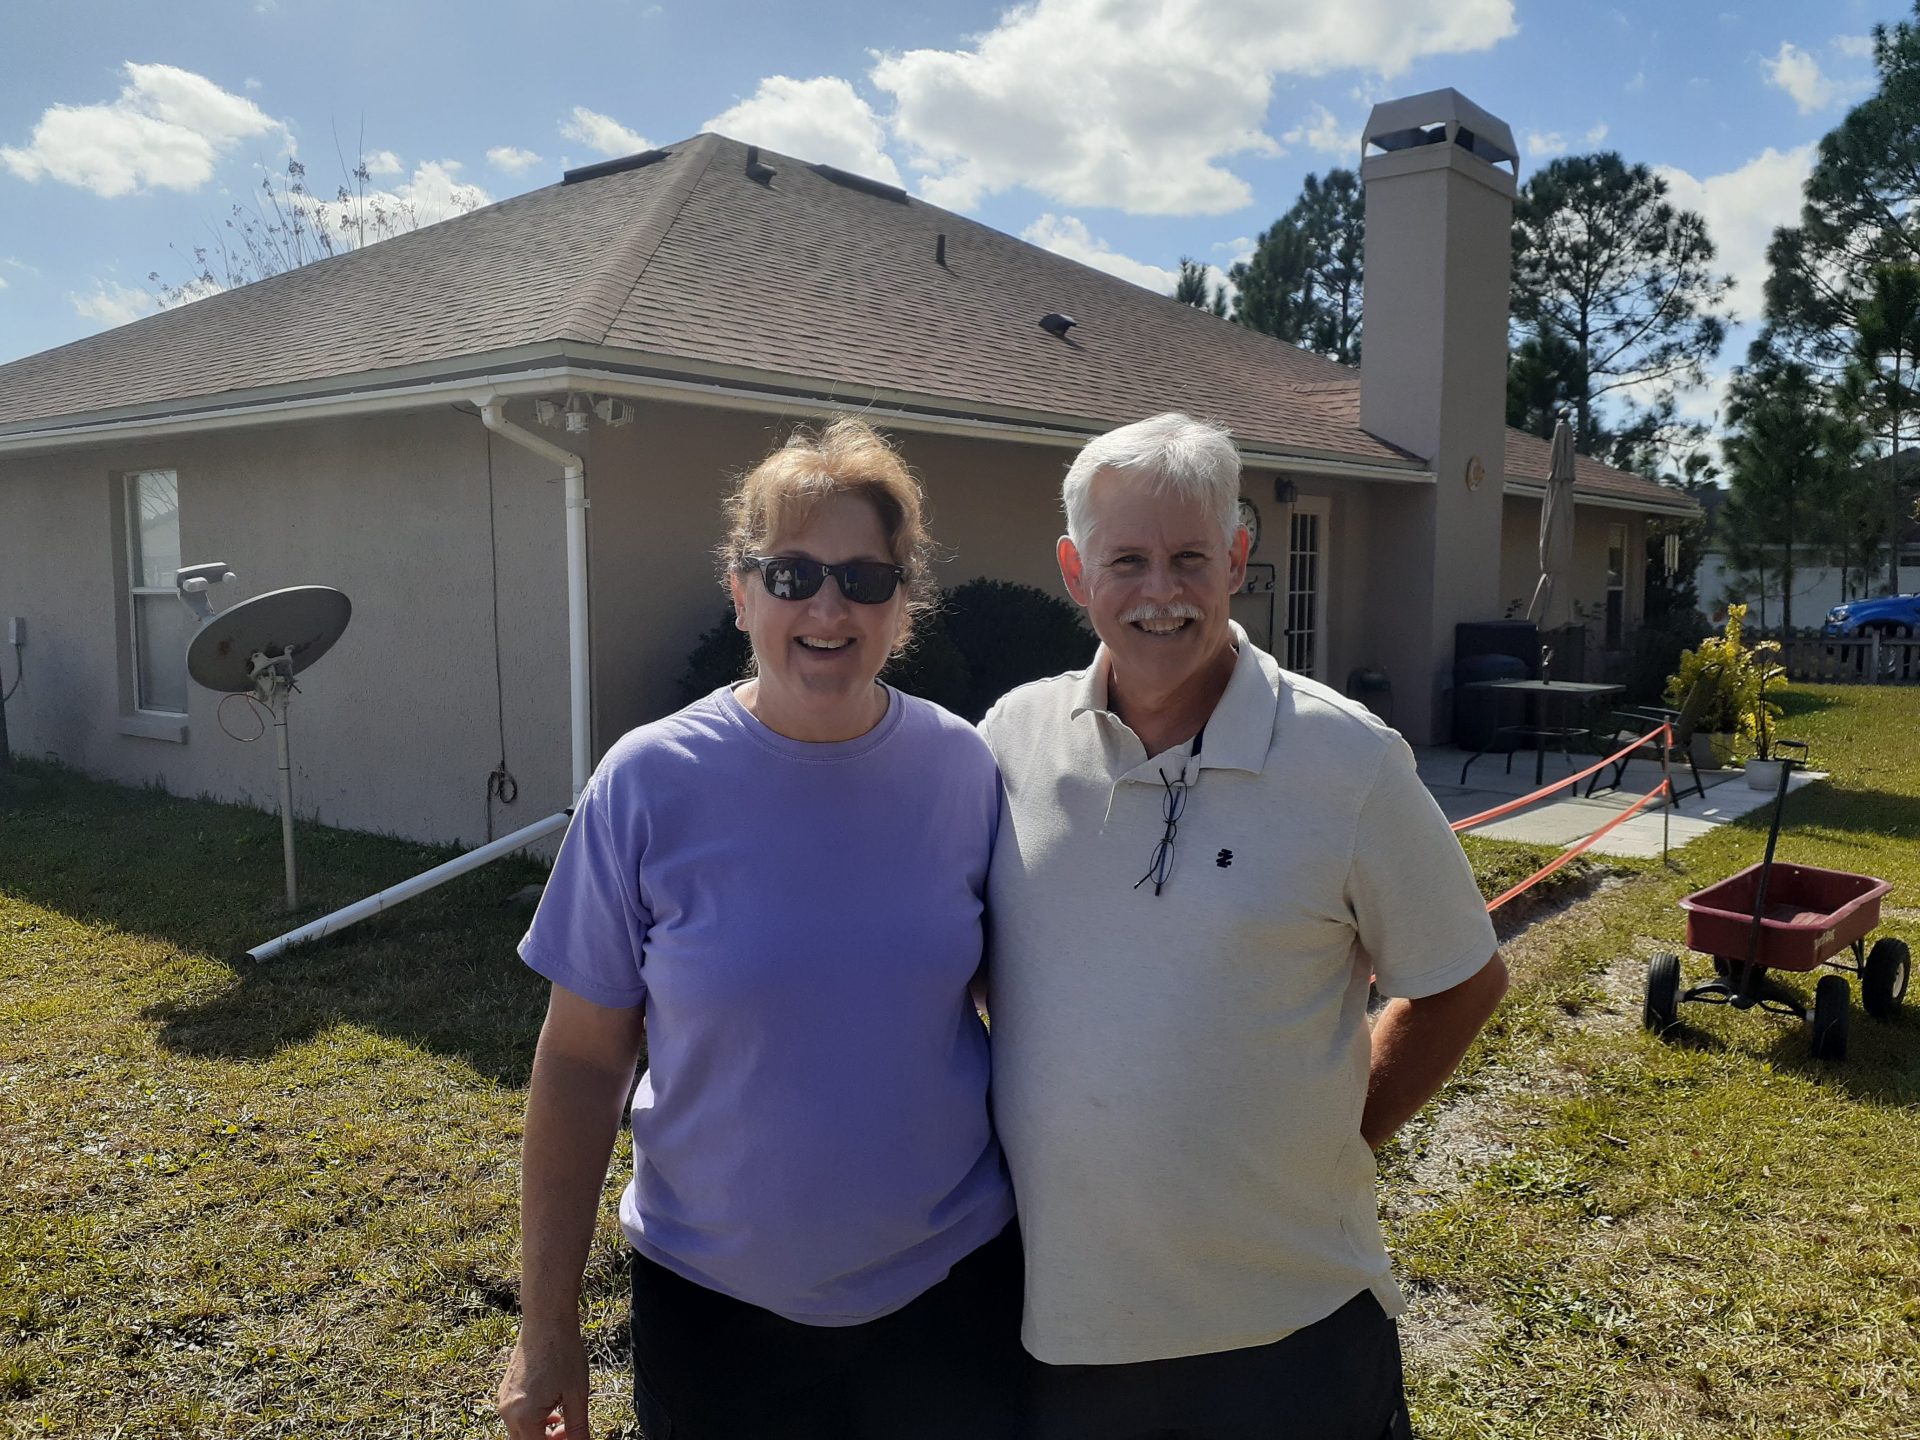 Our dear friends and neighbor Chris and Karen in Wedgefield, Florida.